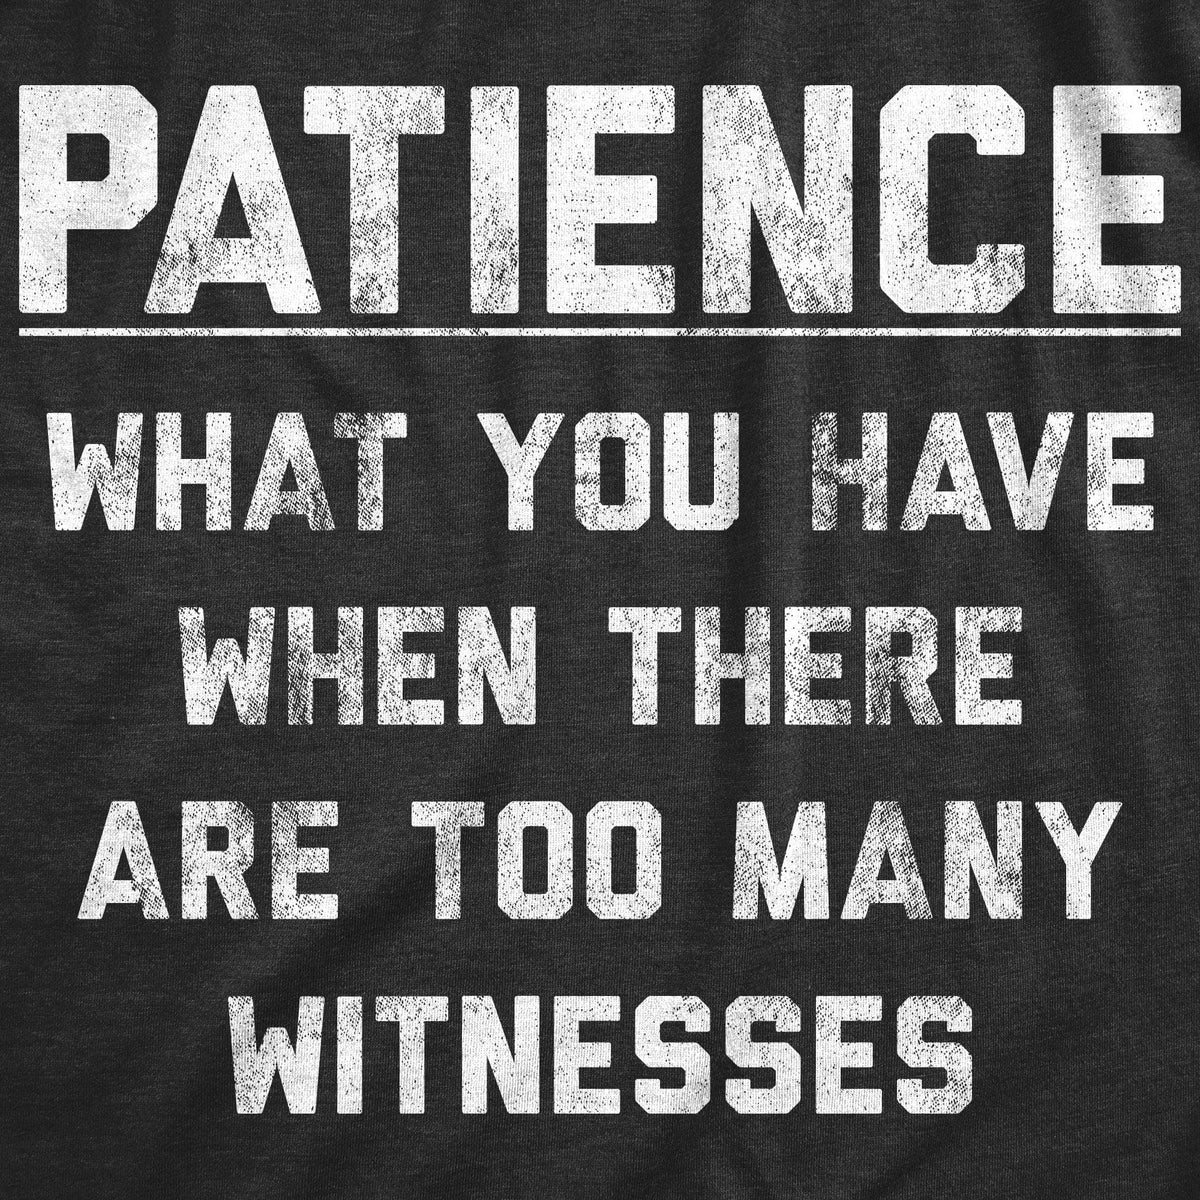 Patience What You Have When There Are Too Many Witnesses Women&#39;s Tshirt - Crazy Dog T-Shirts